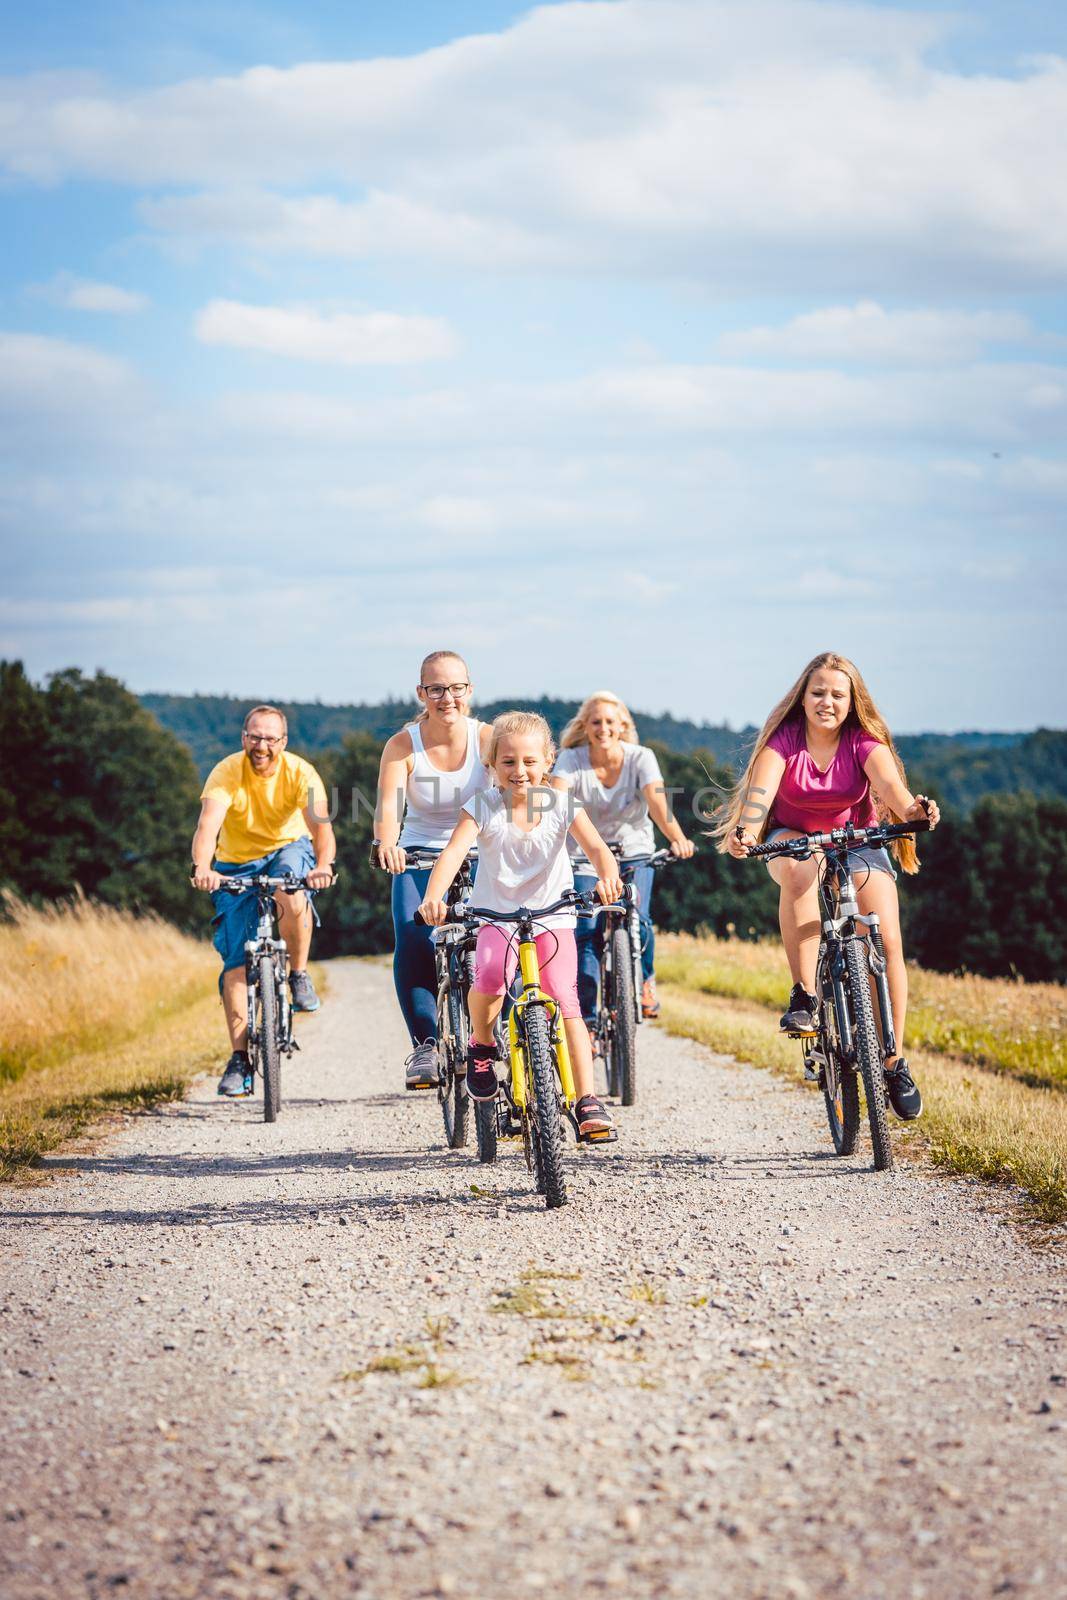 Family riding their bicycles on afternoon in the countryside by Kzenon